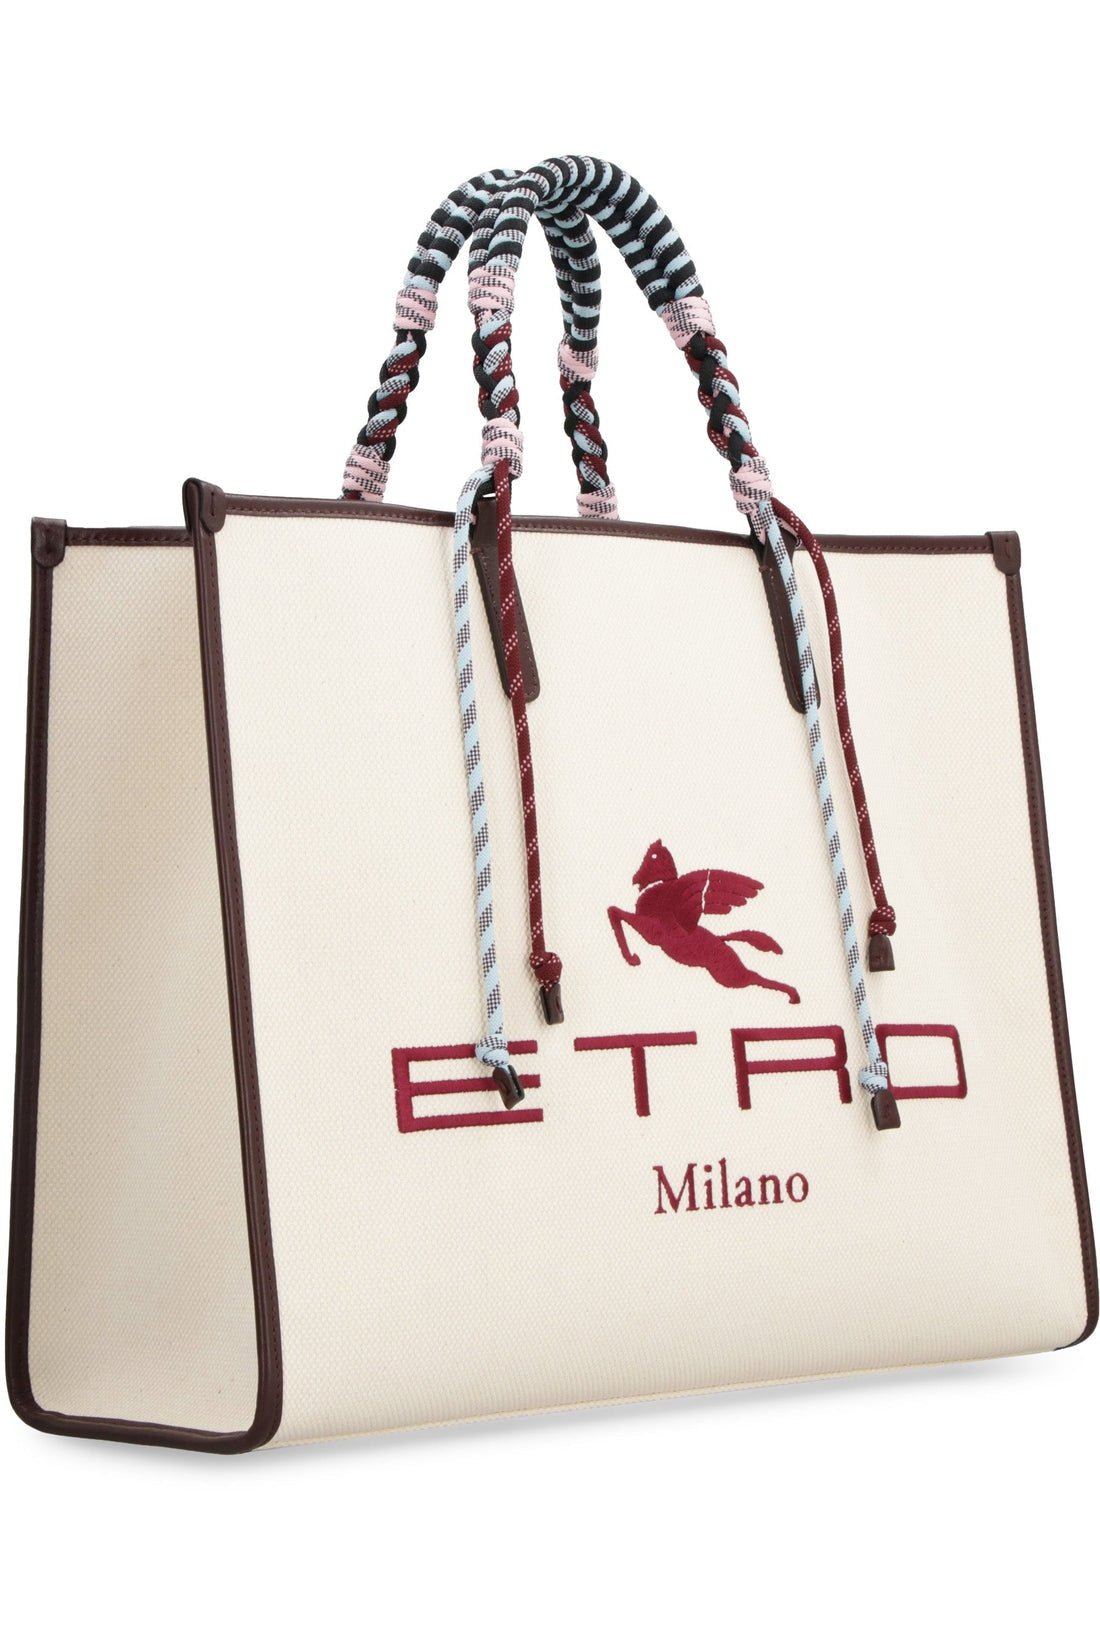 Etro-OUTLET-SALE-Canvas and leather tote bag-ARCHIVIST